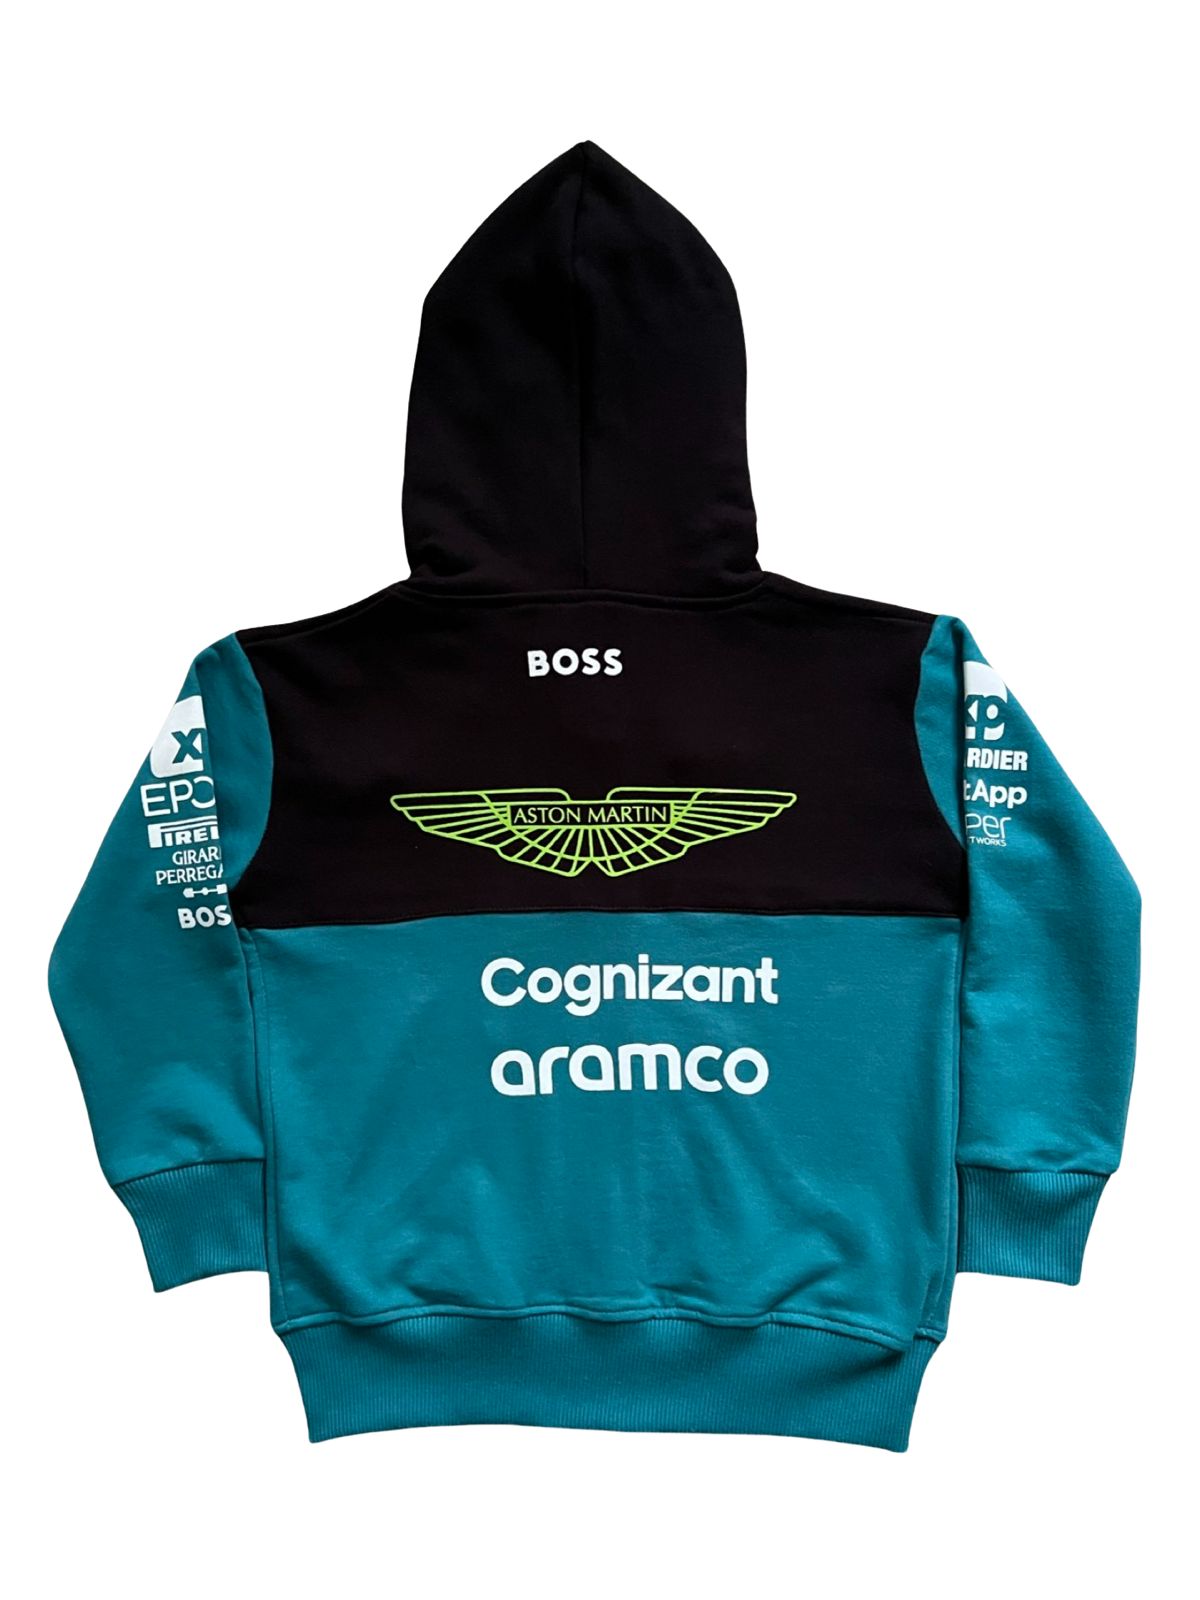 New Aston Martin Racing F1 Limited Edition Baby Tracksuit 100% cotton | Fan Edition